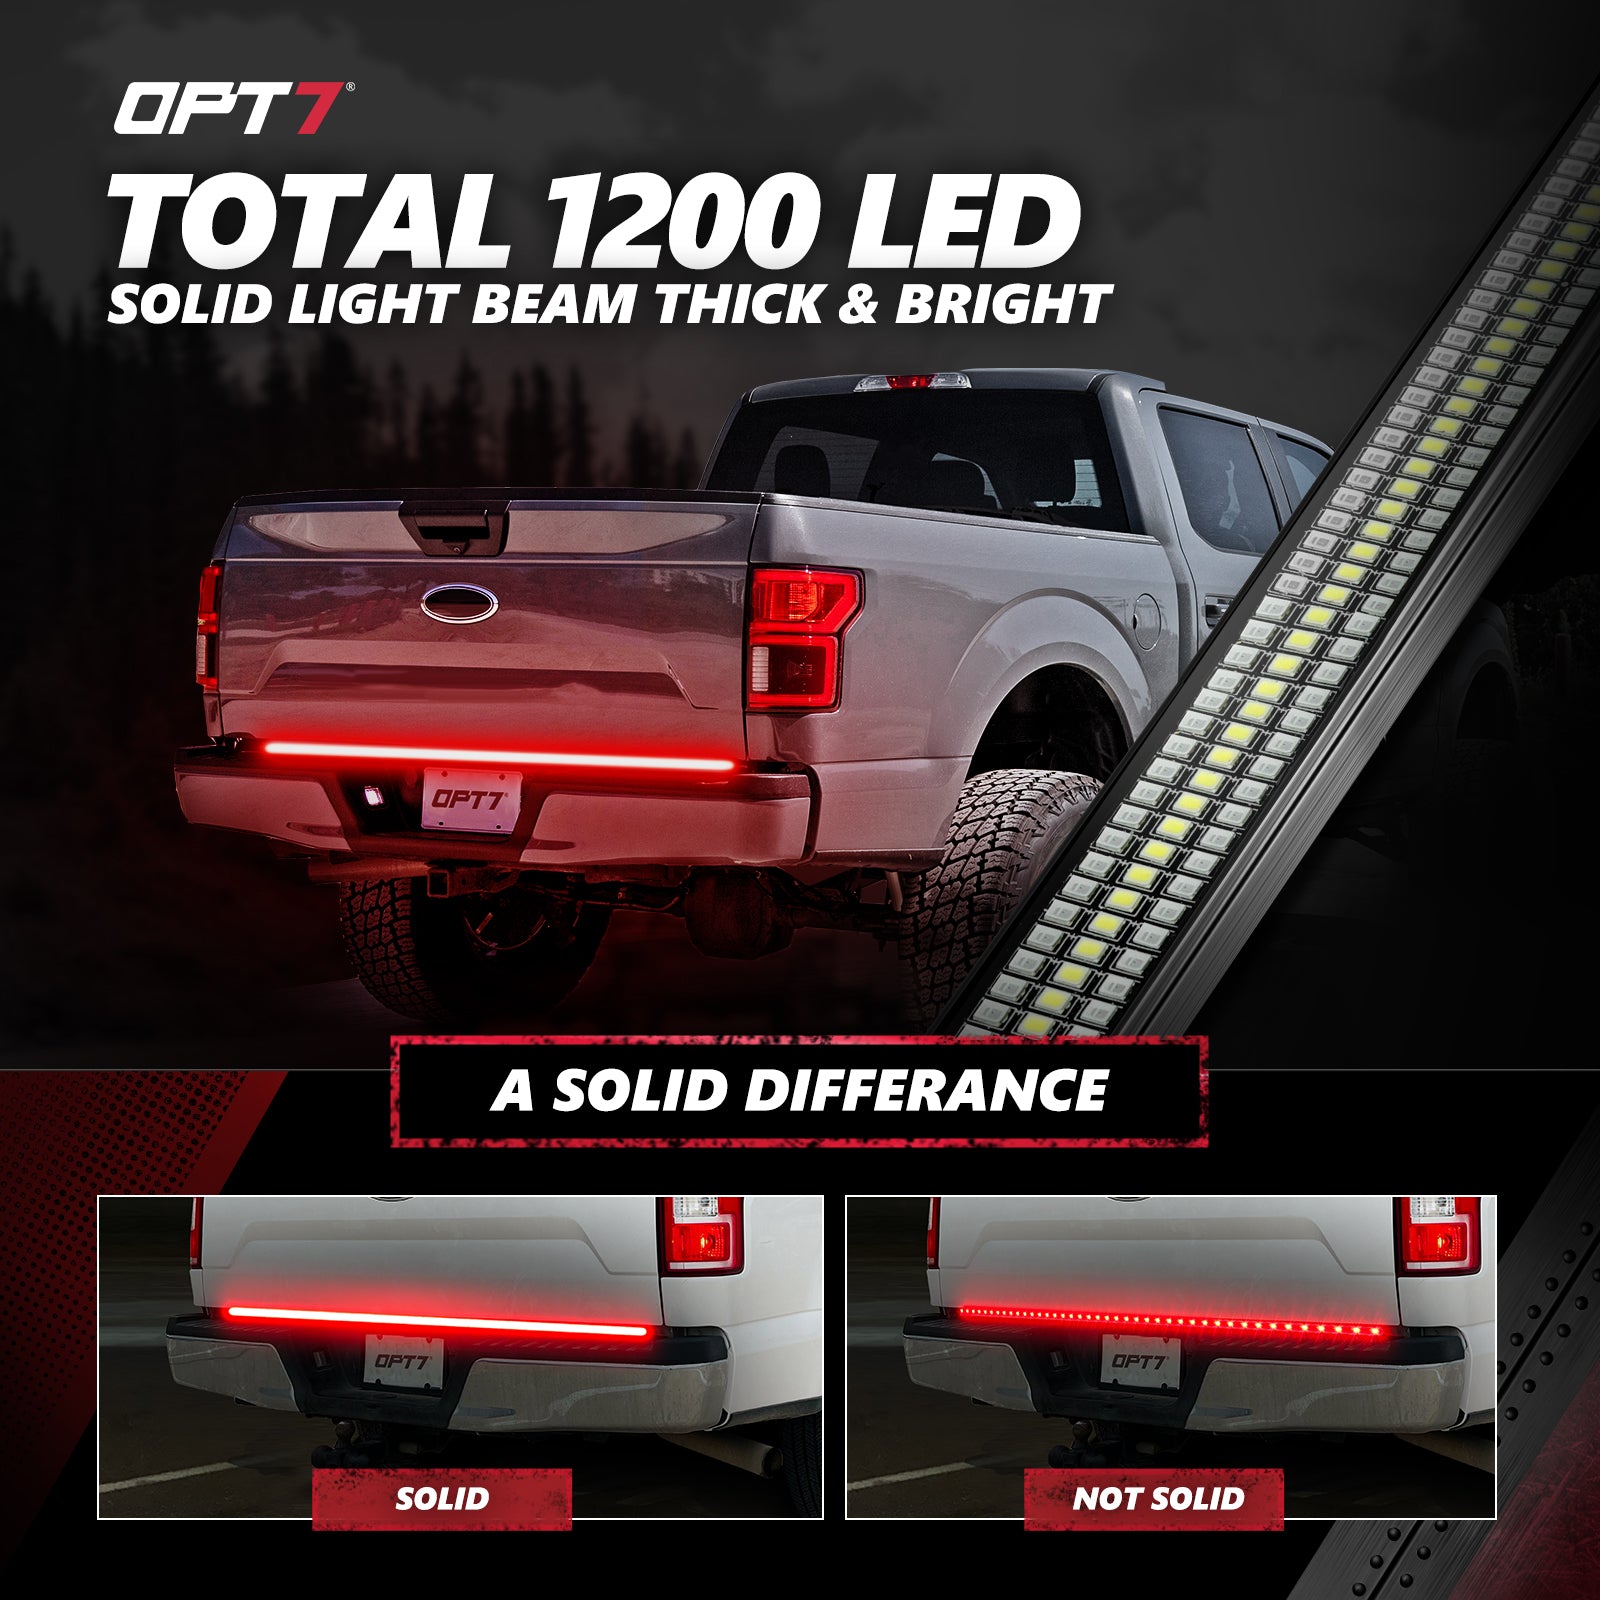 Sequential Tailgate LED Light Bar from XKGLOW